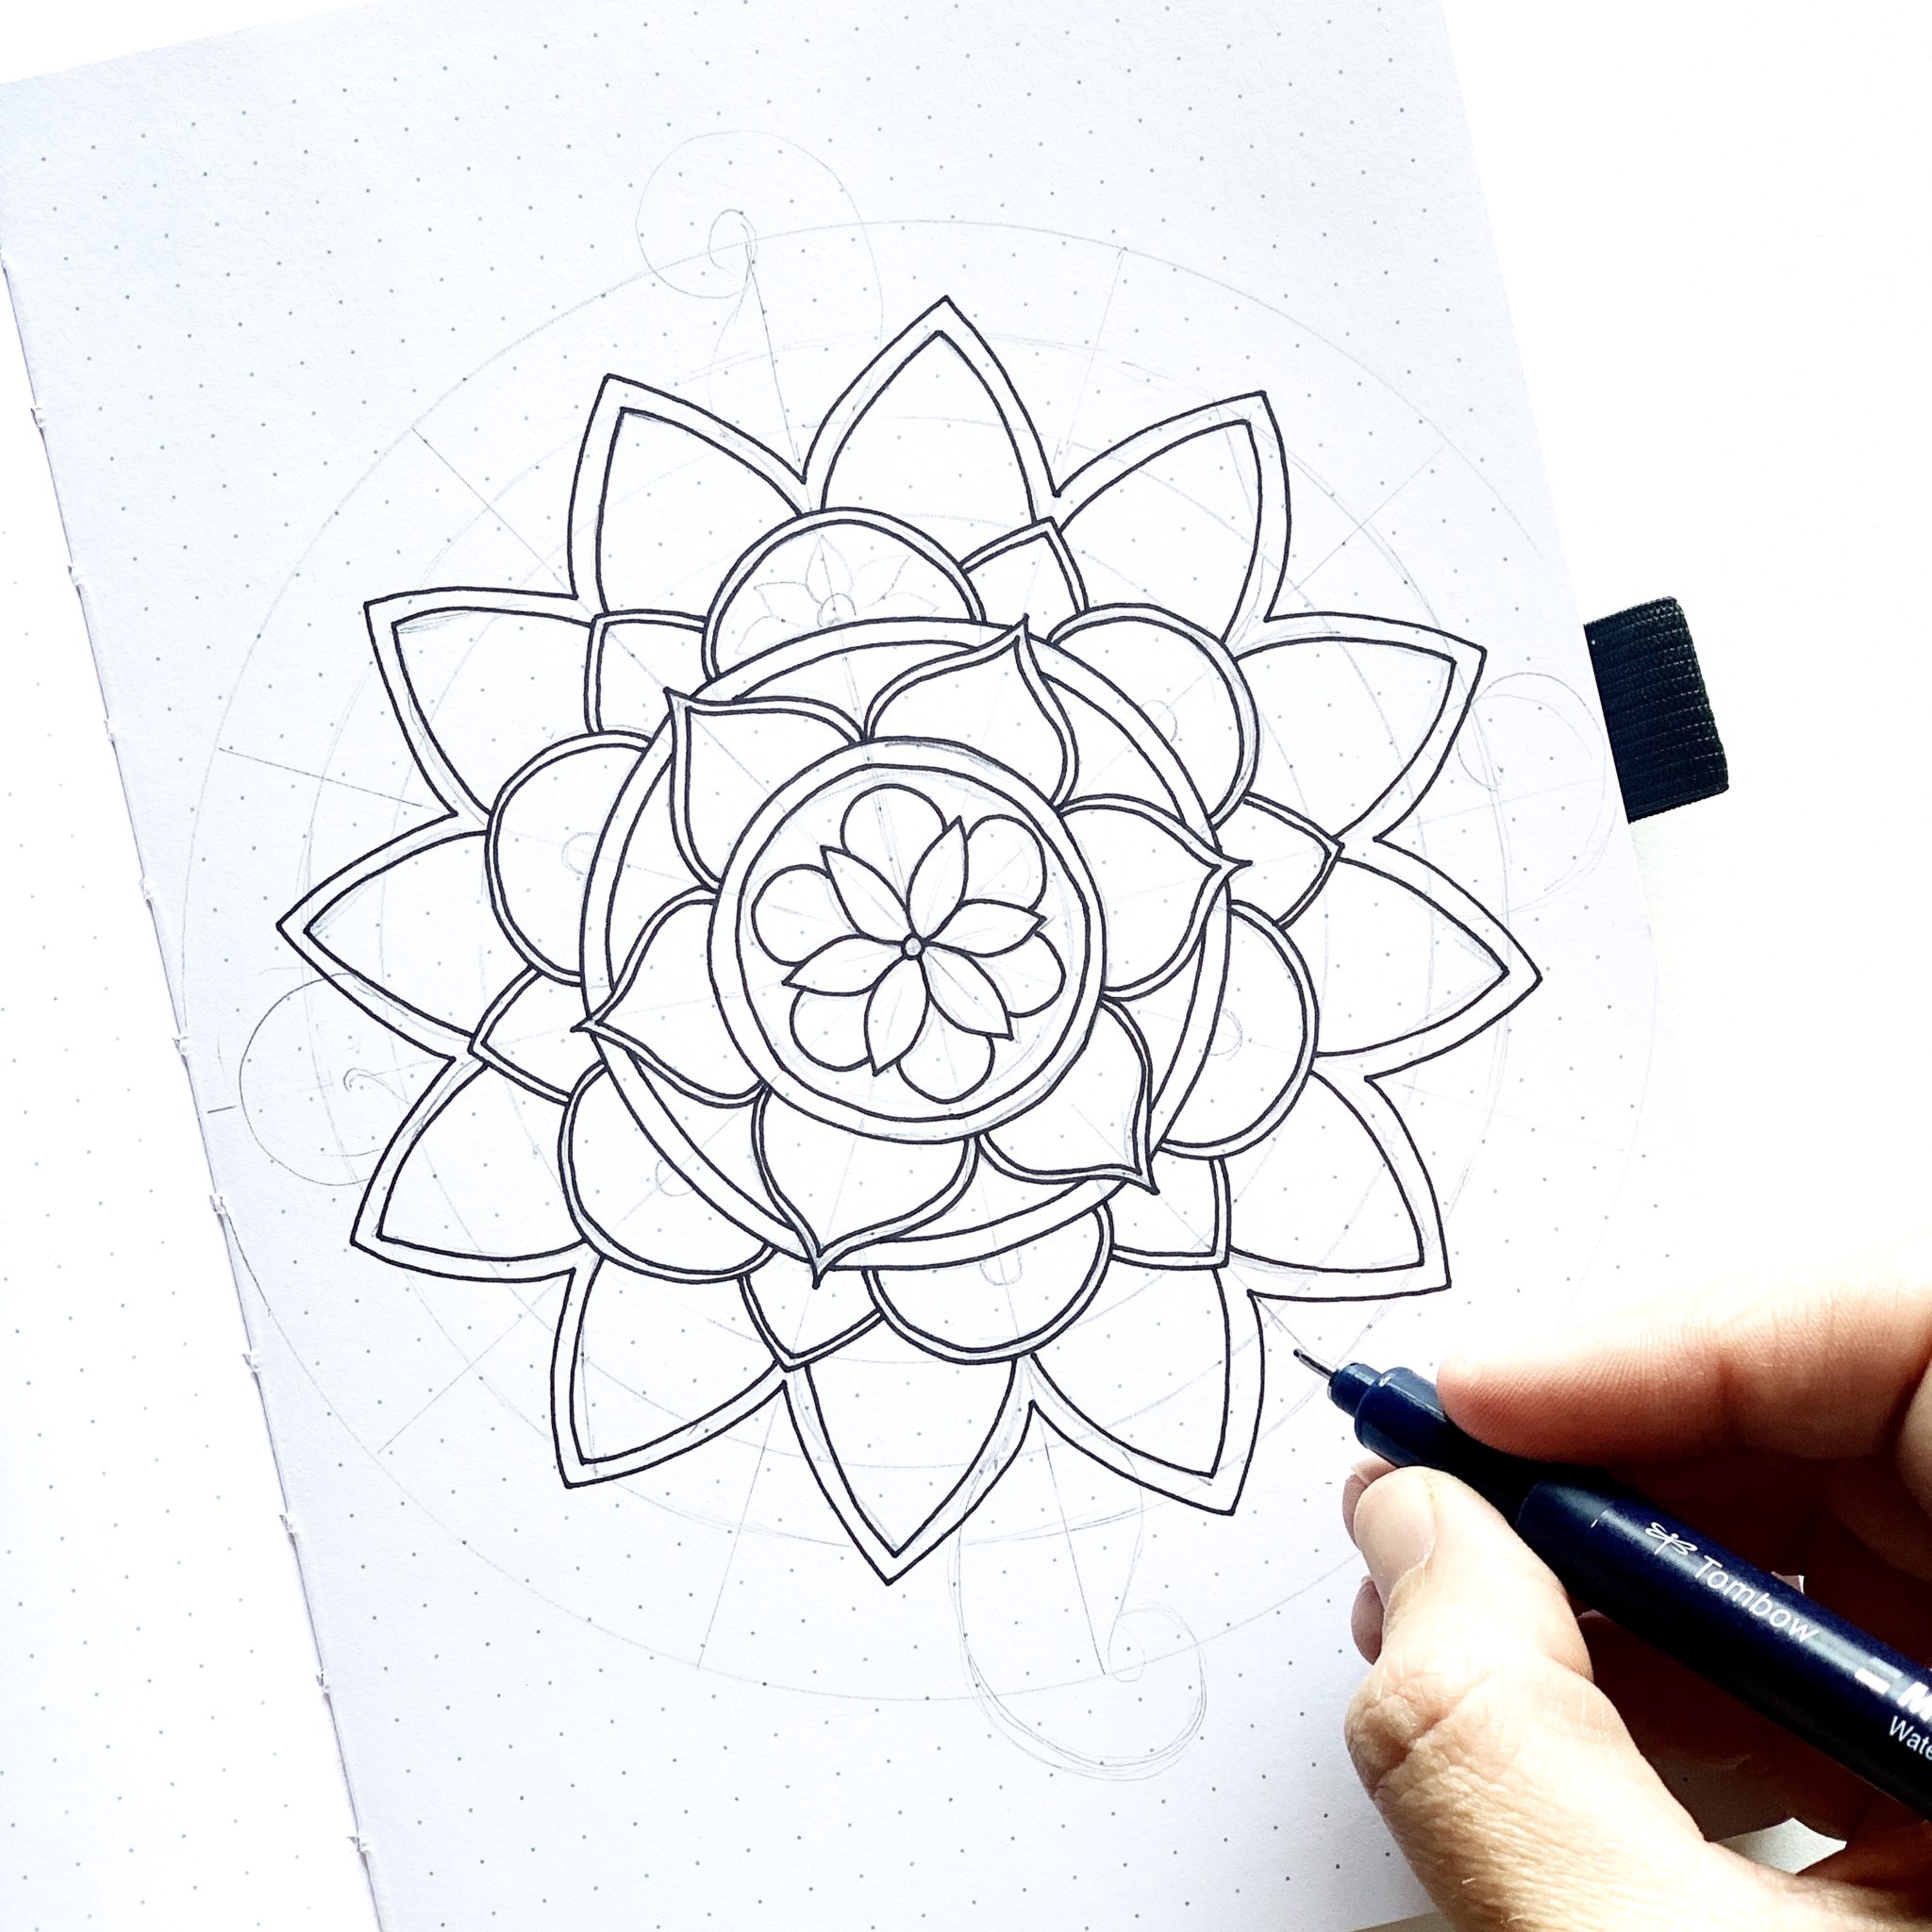 How to Draw a Mandala  Step by Step Tutorial for Beginners